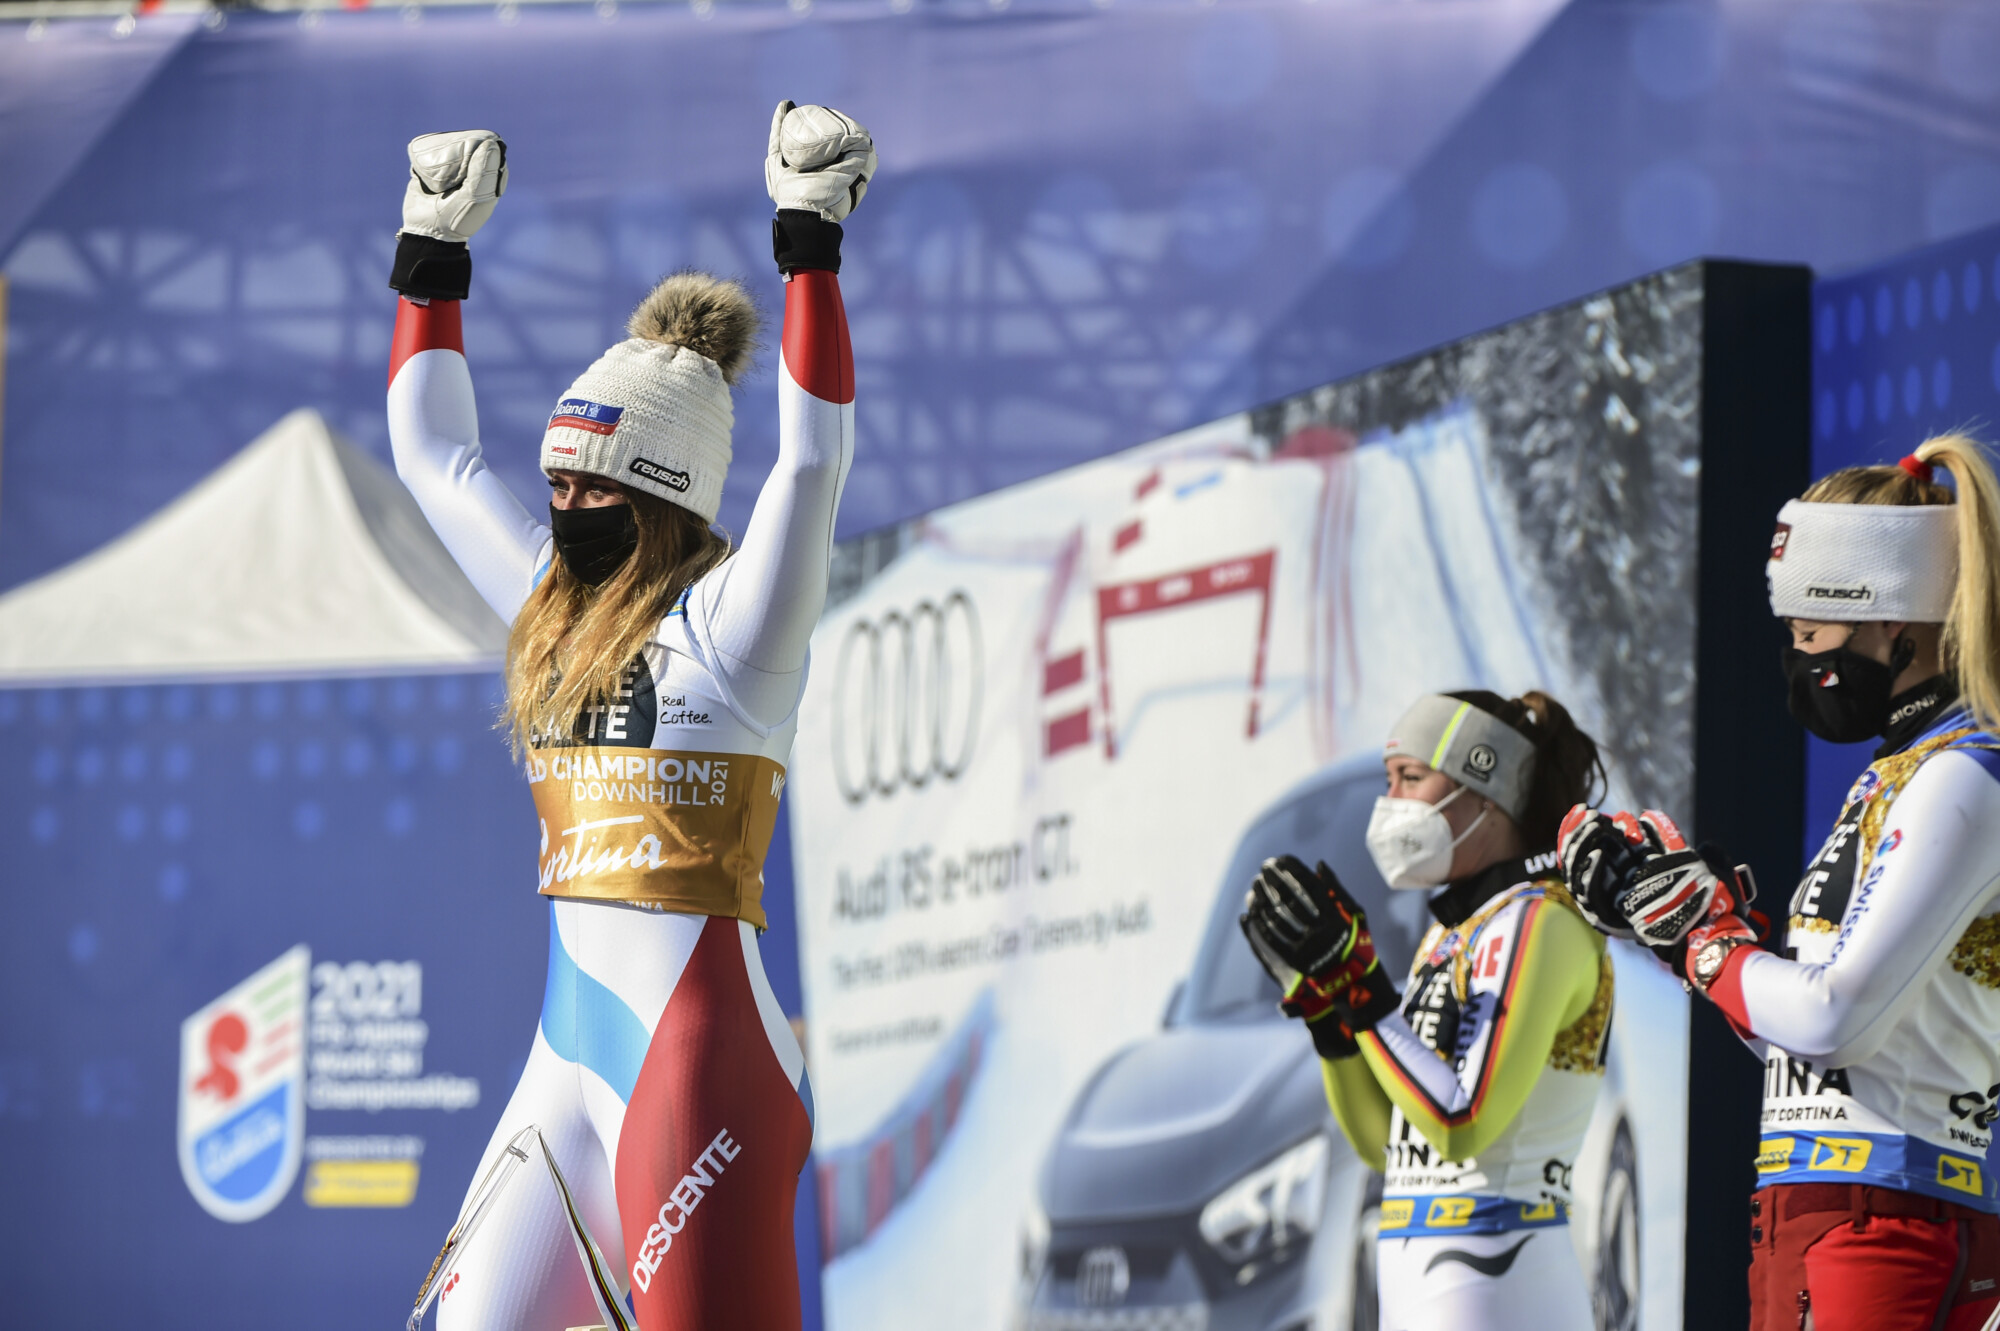 Riding High: Suter Wins Downhill for Her 1st Gold at Worlds